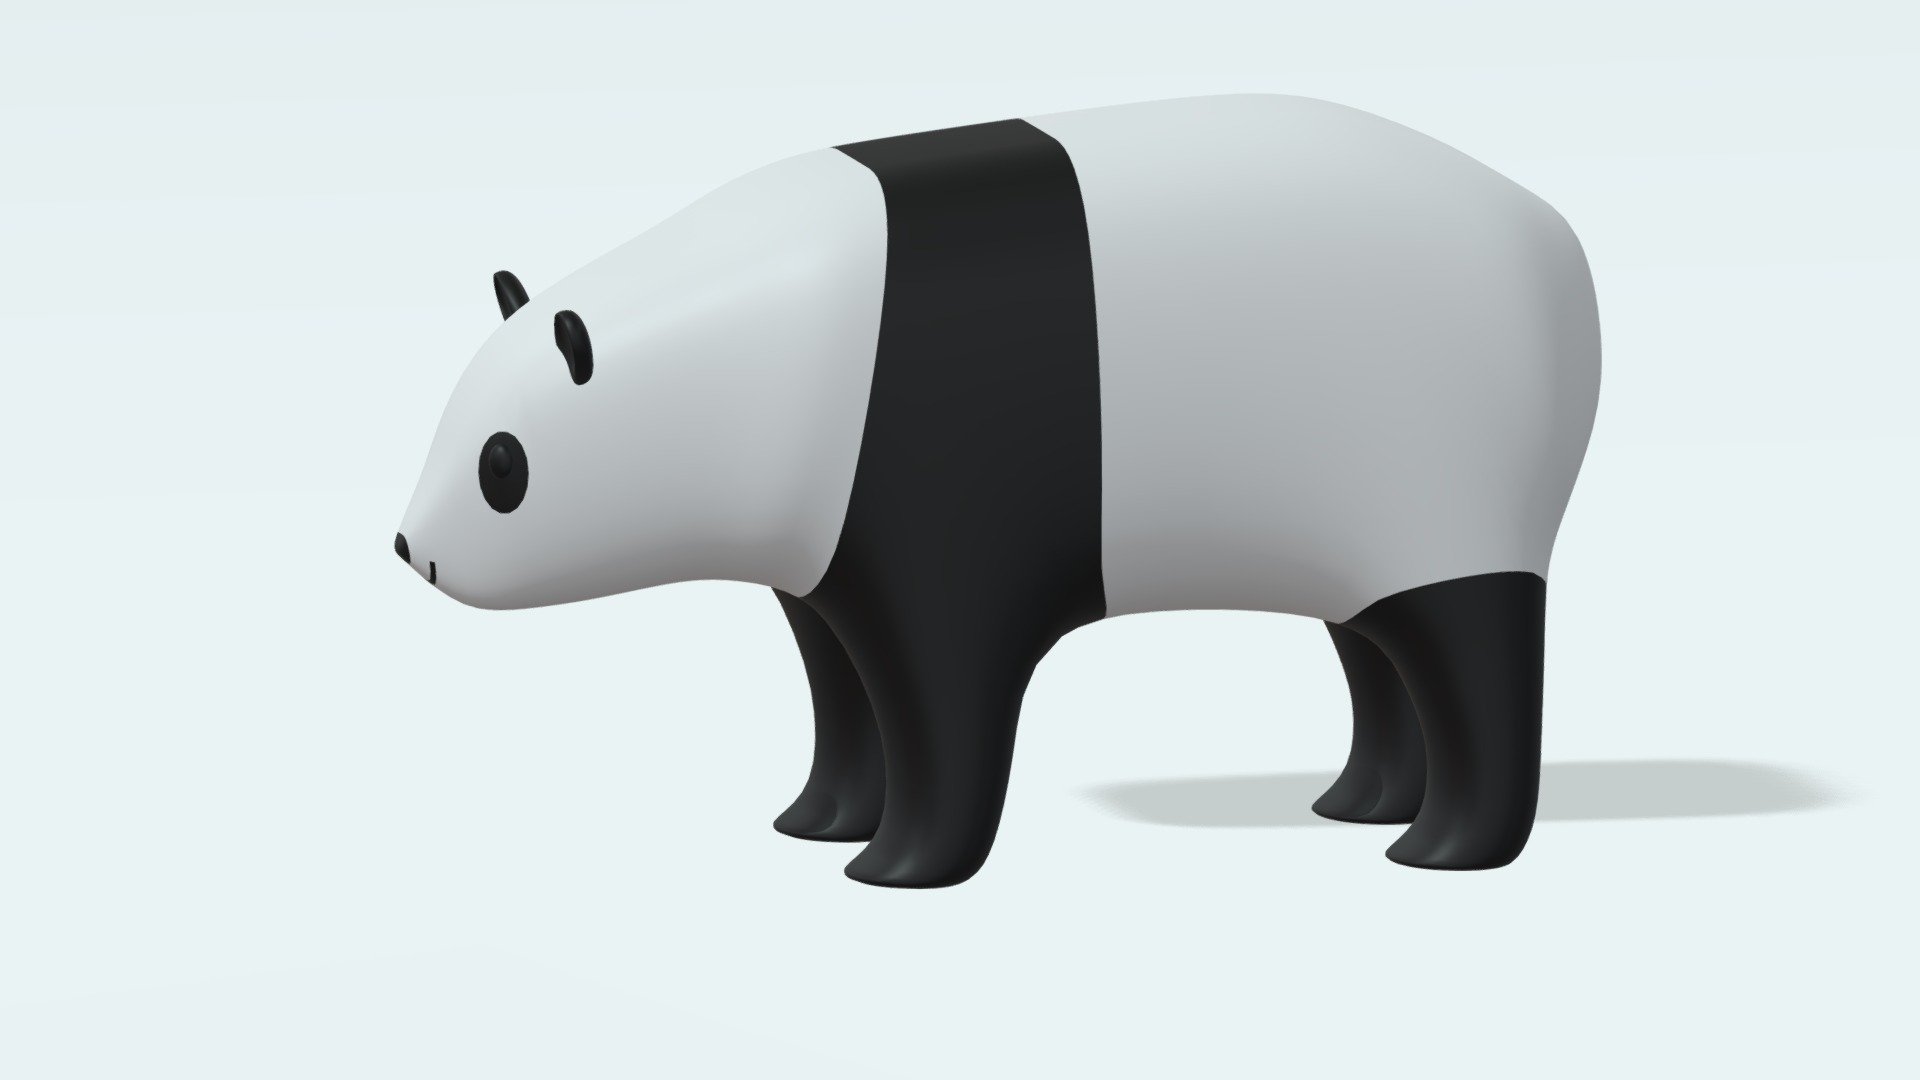 -Cartoon Panda Bear.

-This product contains 5 objects.

-Total vert: 9,292 poly: 9,344.

-Objects and materials have the correct names.

-This product was created in Blender 2.8.

-Formats: blend, fbx, obj, c4d, dae, abc, stl, u4d glb, unity.

-We hope you enjoy this model.

-Thank you 3d model